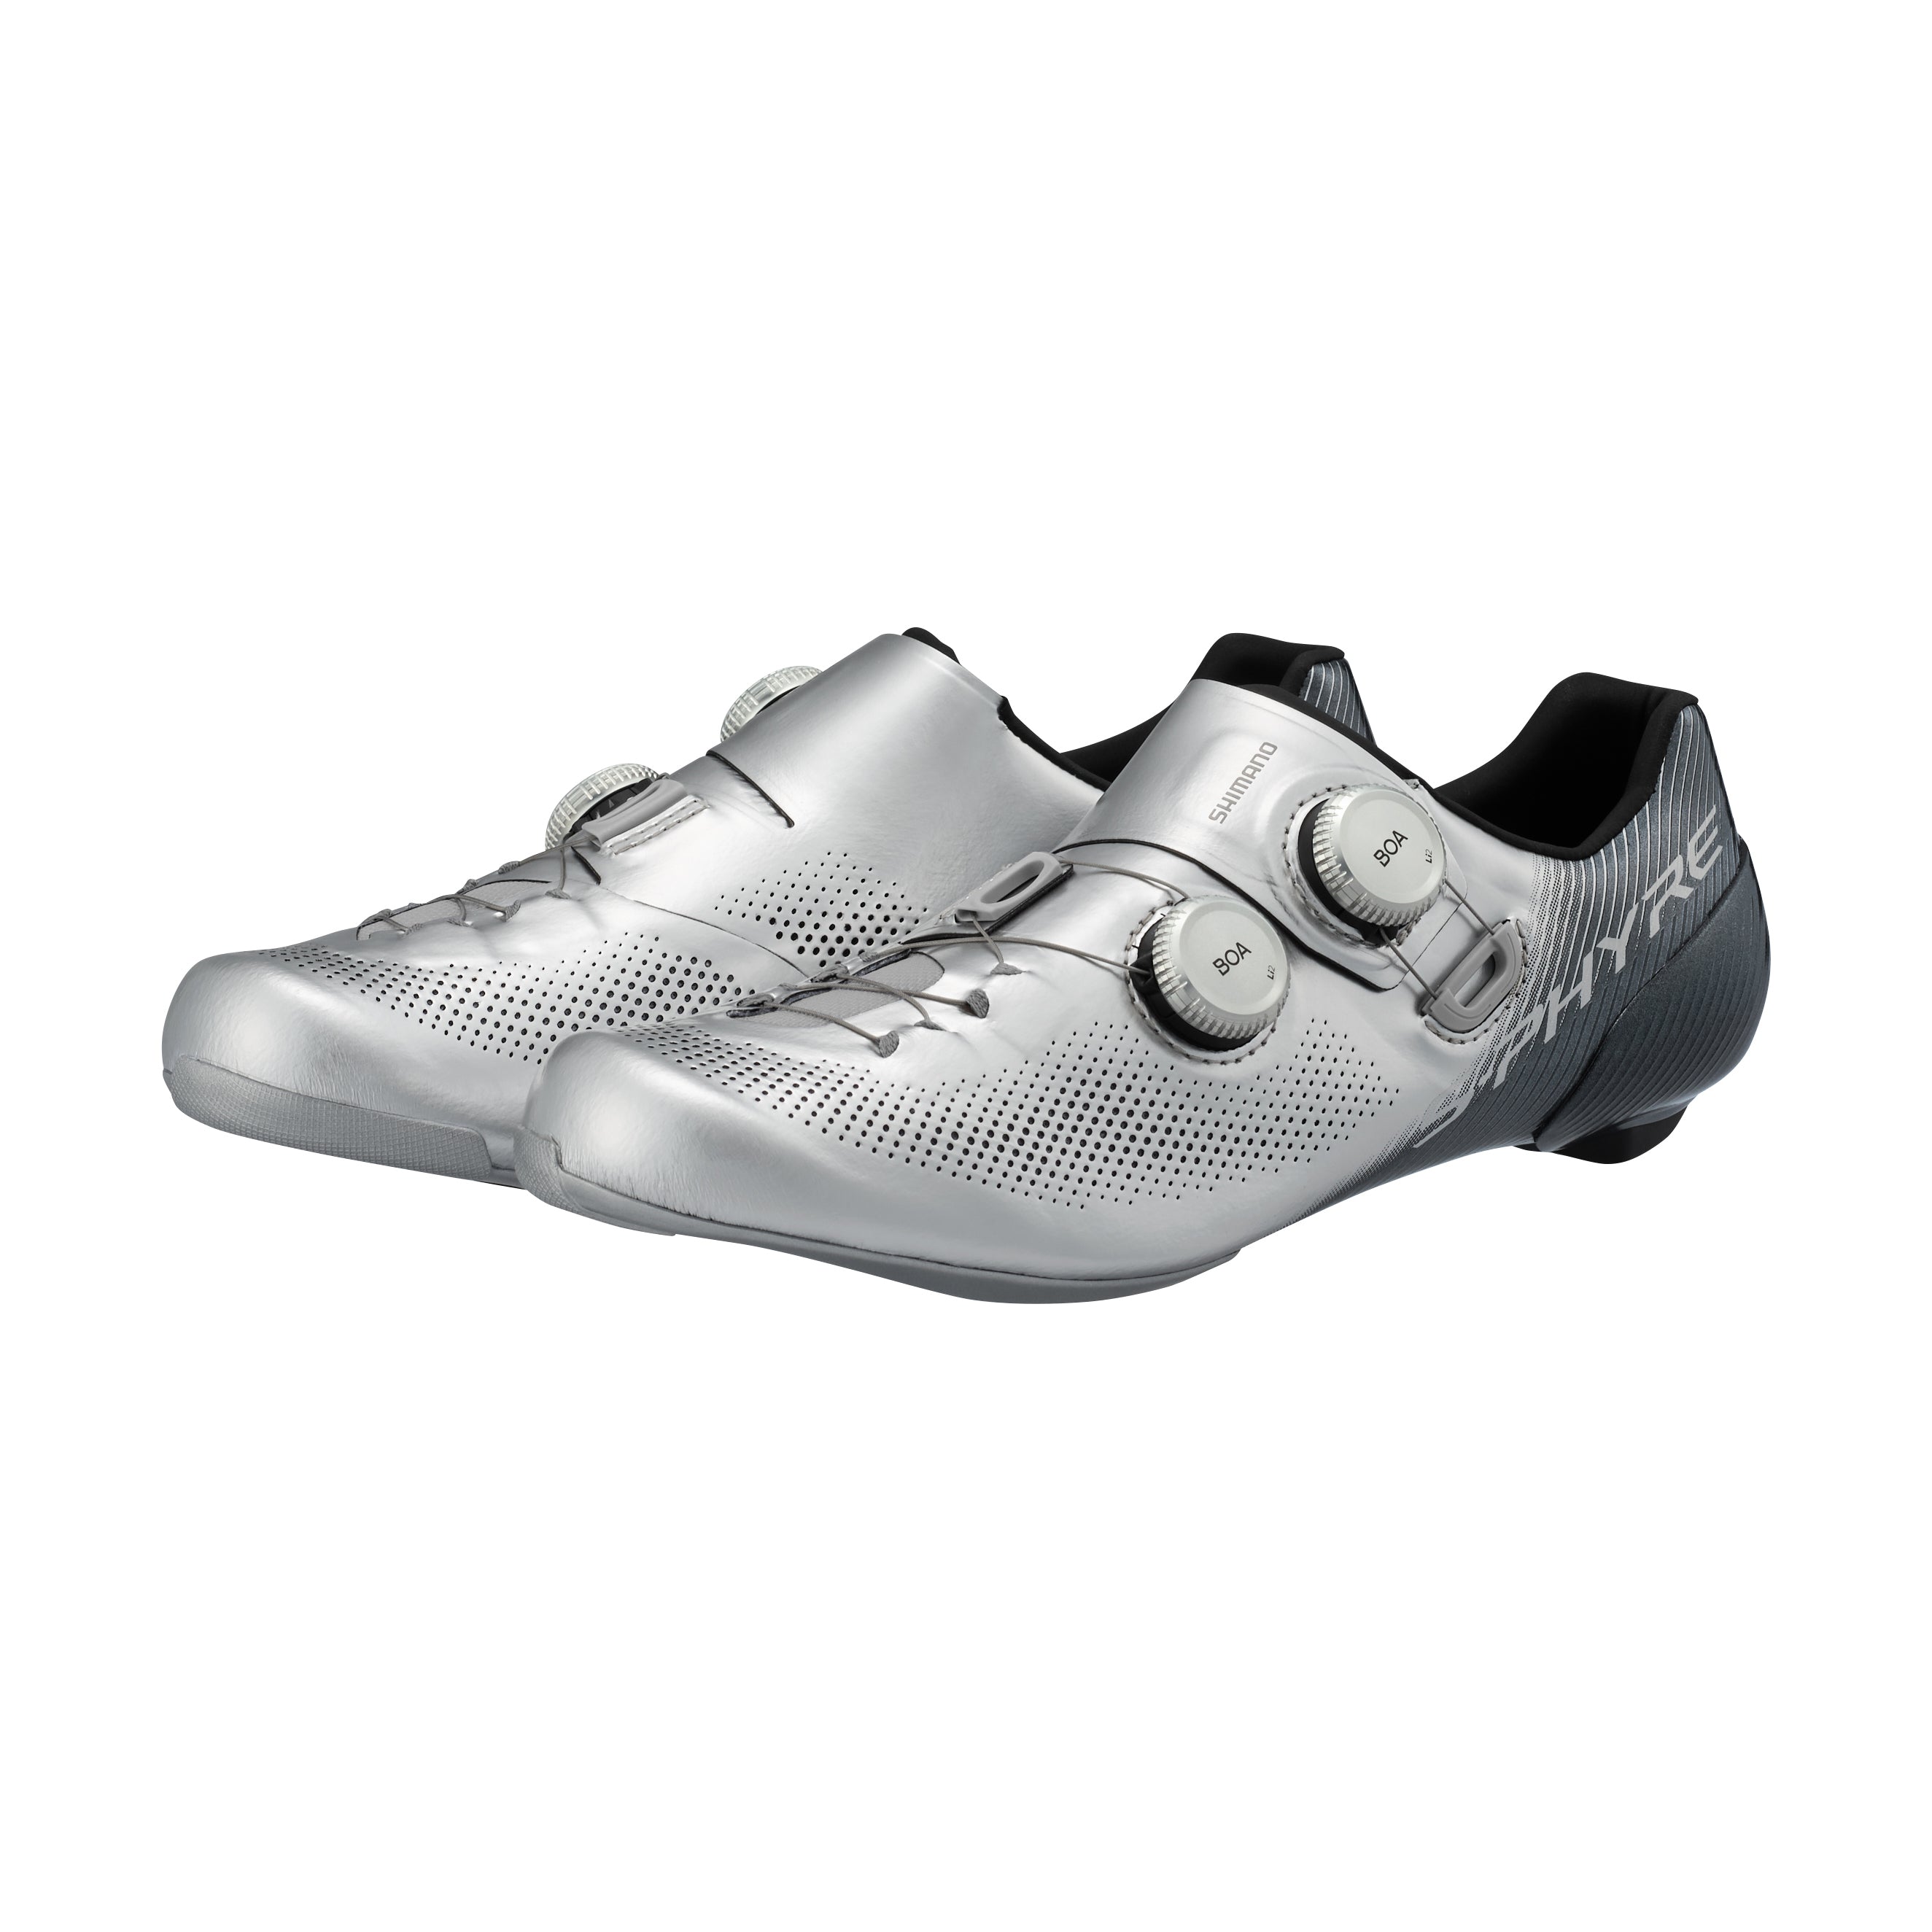 SHIMANO SH-RC903S S-PHYRE road shoes-wide silver-black special edition/SHIMANO SH-RC903S ROAD SHOES-WIDE-SILVER/BLACK